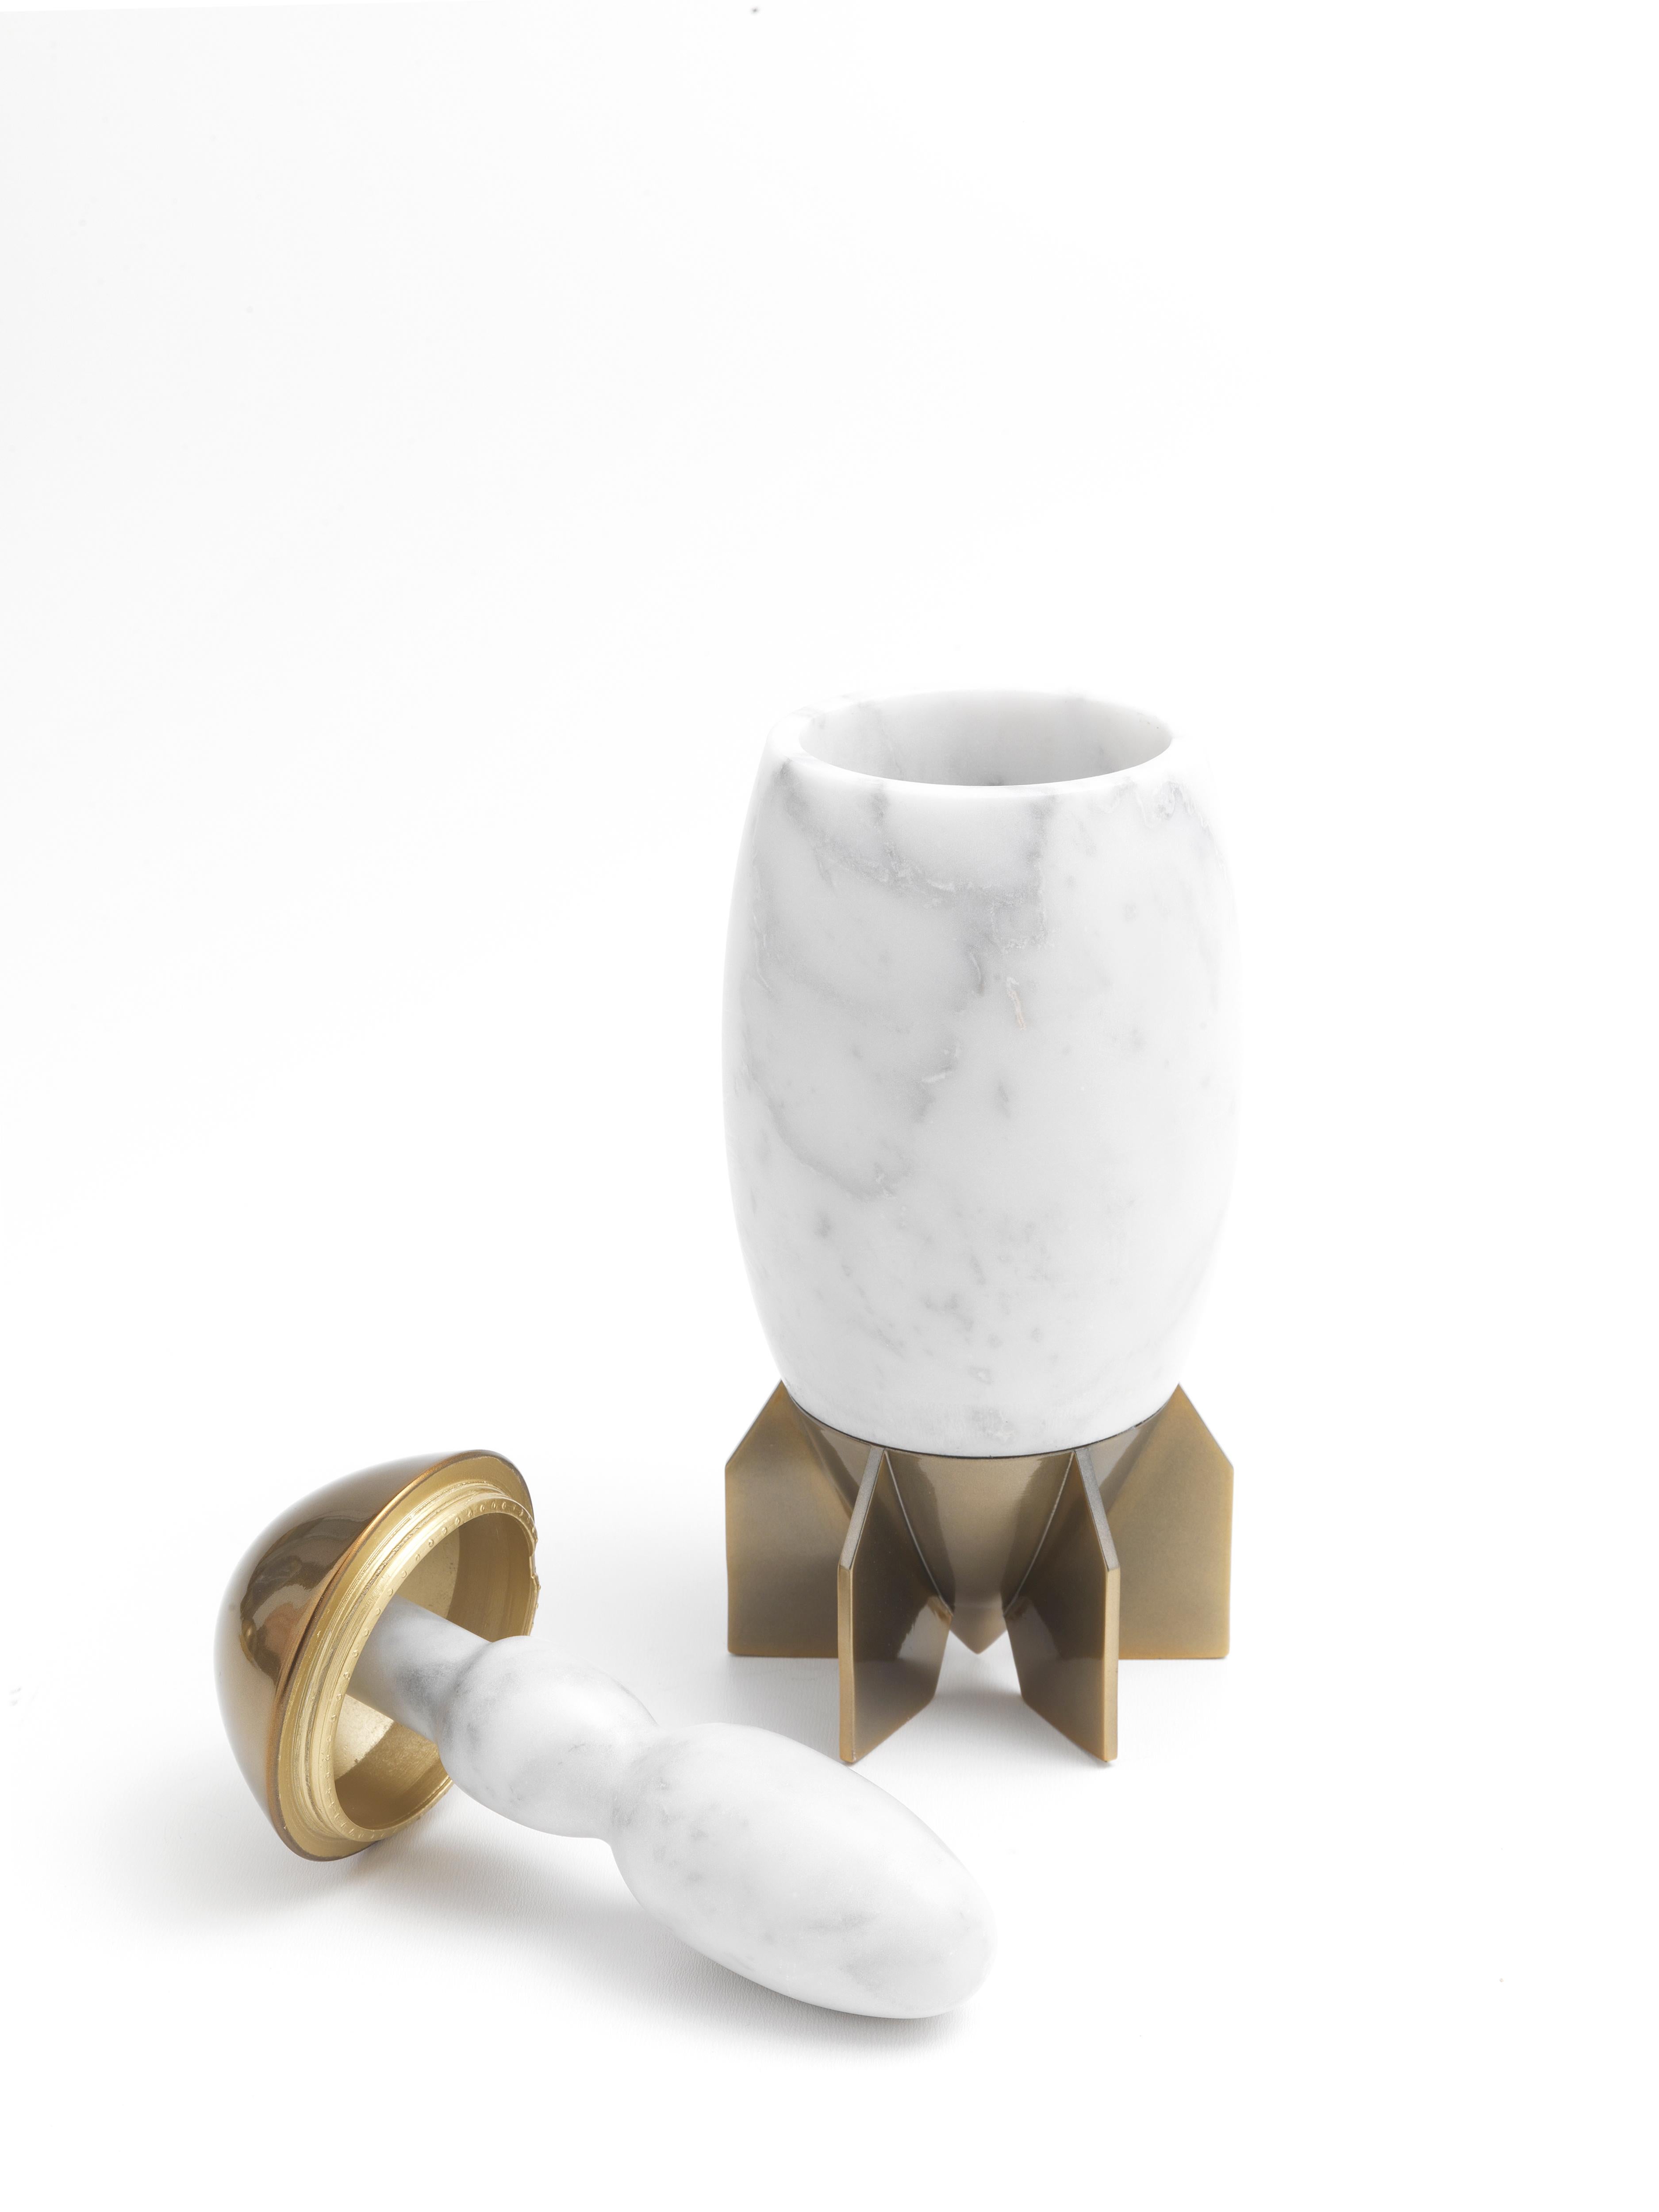 For Sale: White (Carrara Marble) 21st Century Herma Vase in Marble and 3D Printed ABS by Richard Yasmine 2